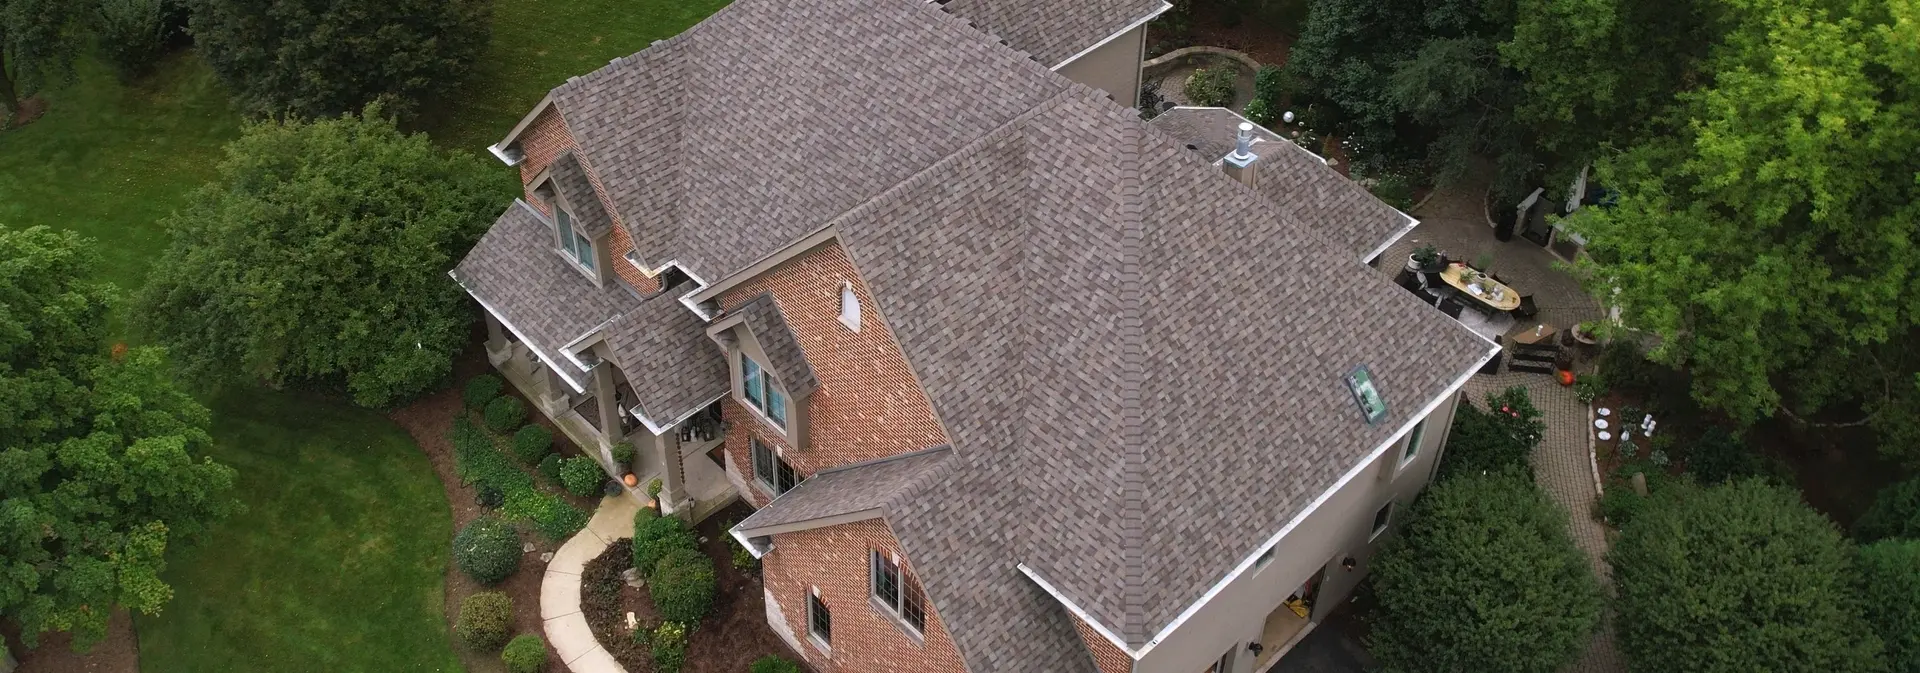 Aerial view of a large brick home with new gutters courtesy of 3JM Exteriors